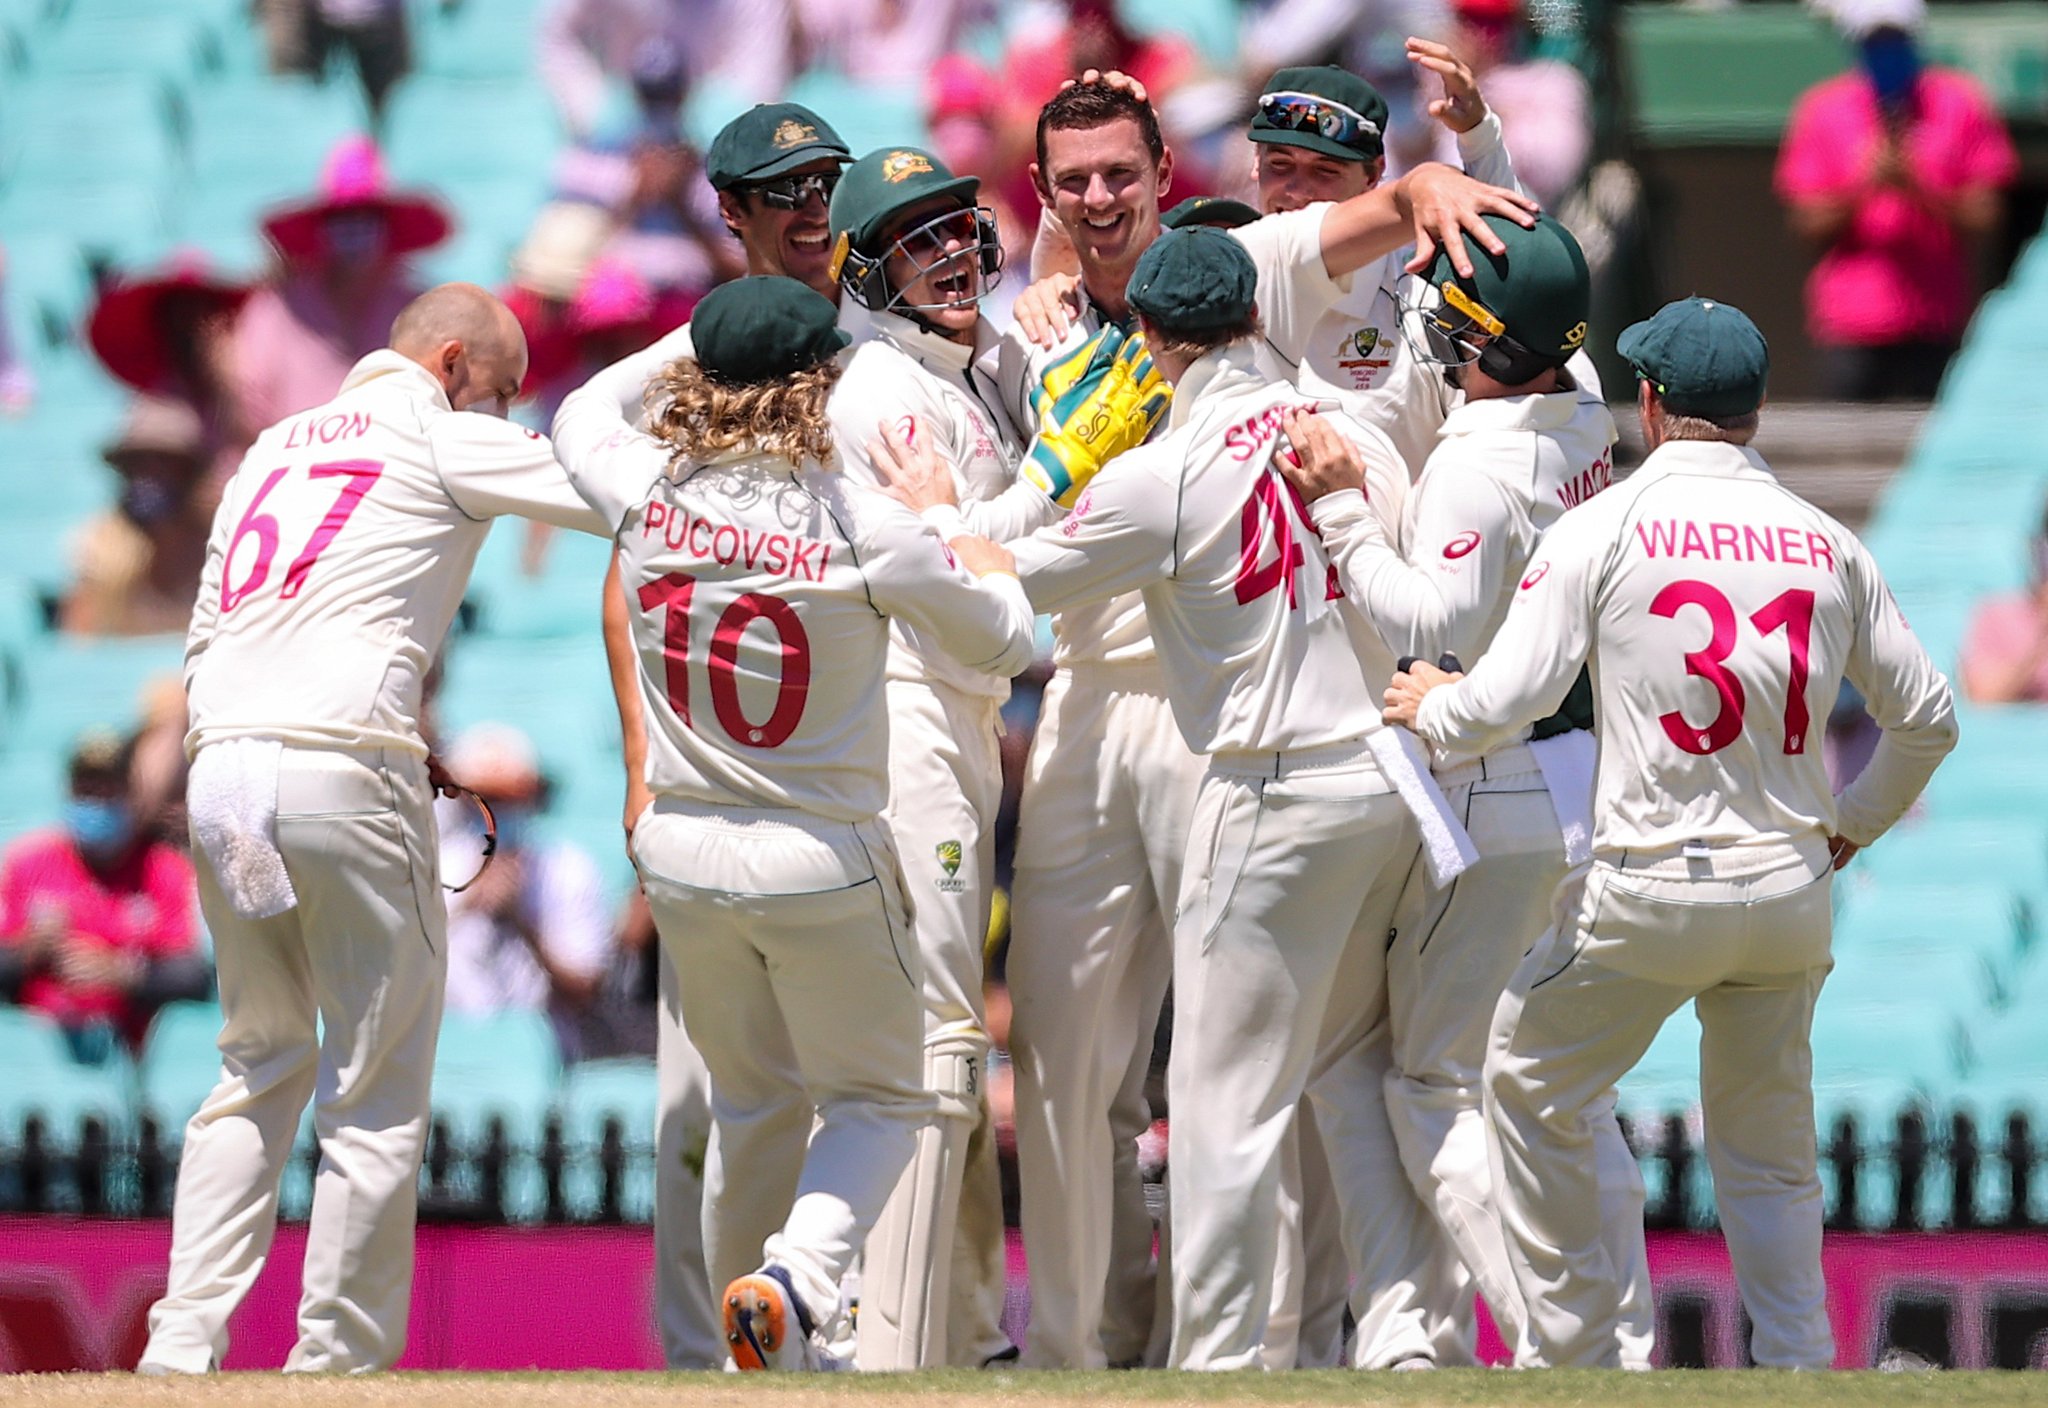 AUS vs IND: Australia end Day 3 at 103/2 to take lead of 197 runs in second innings